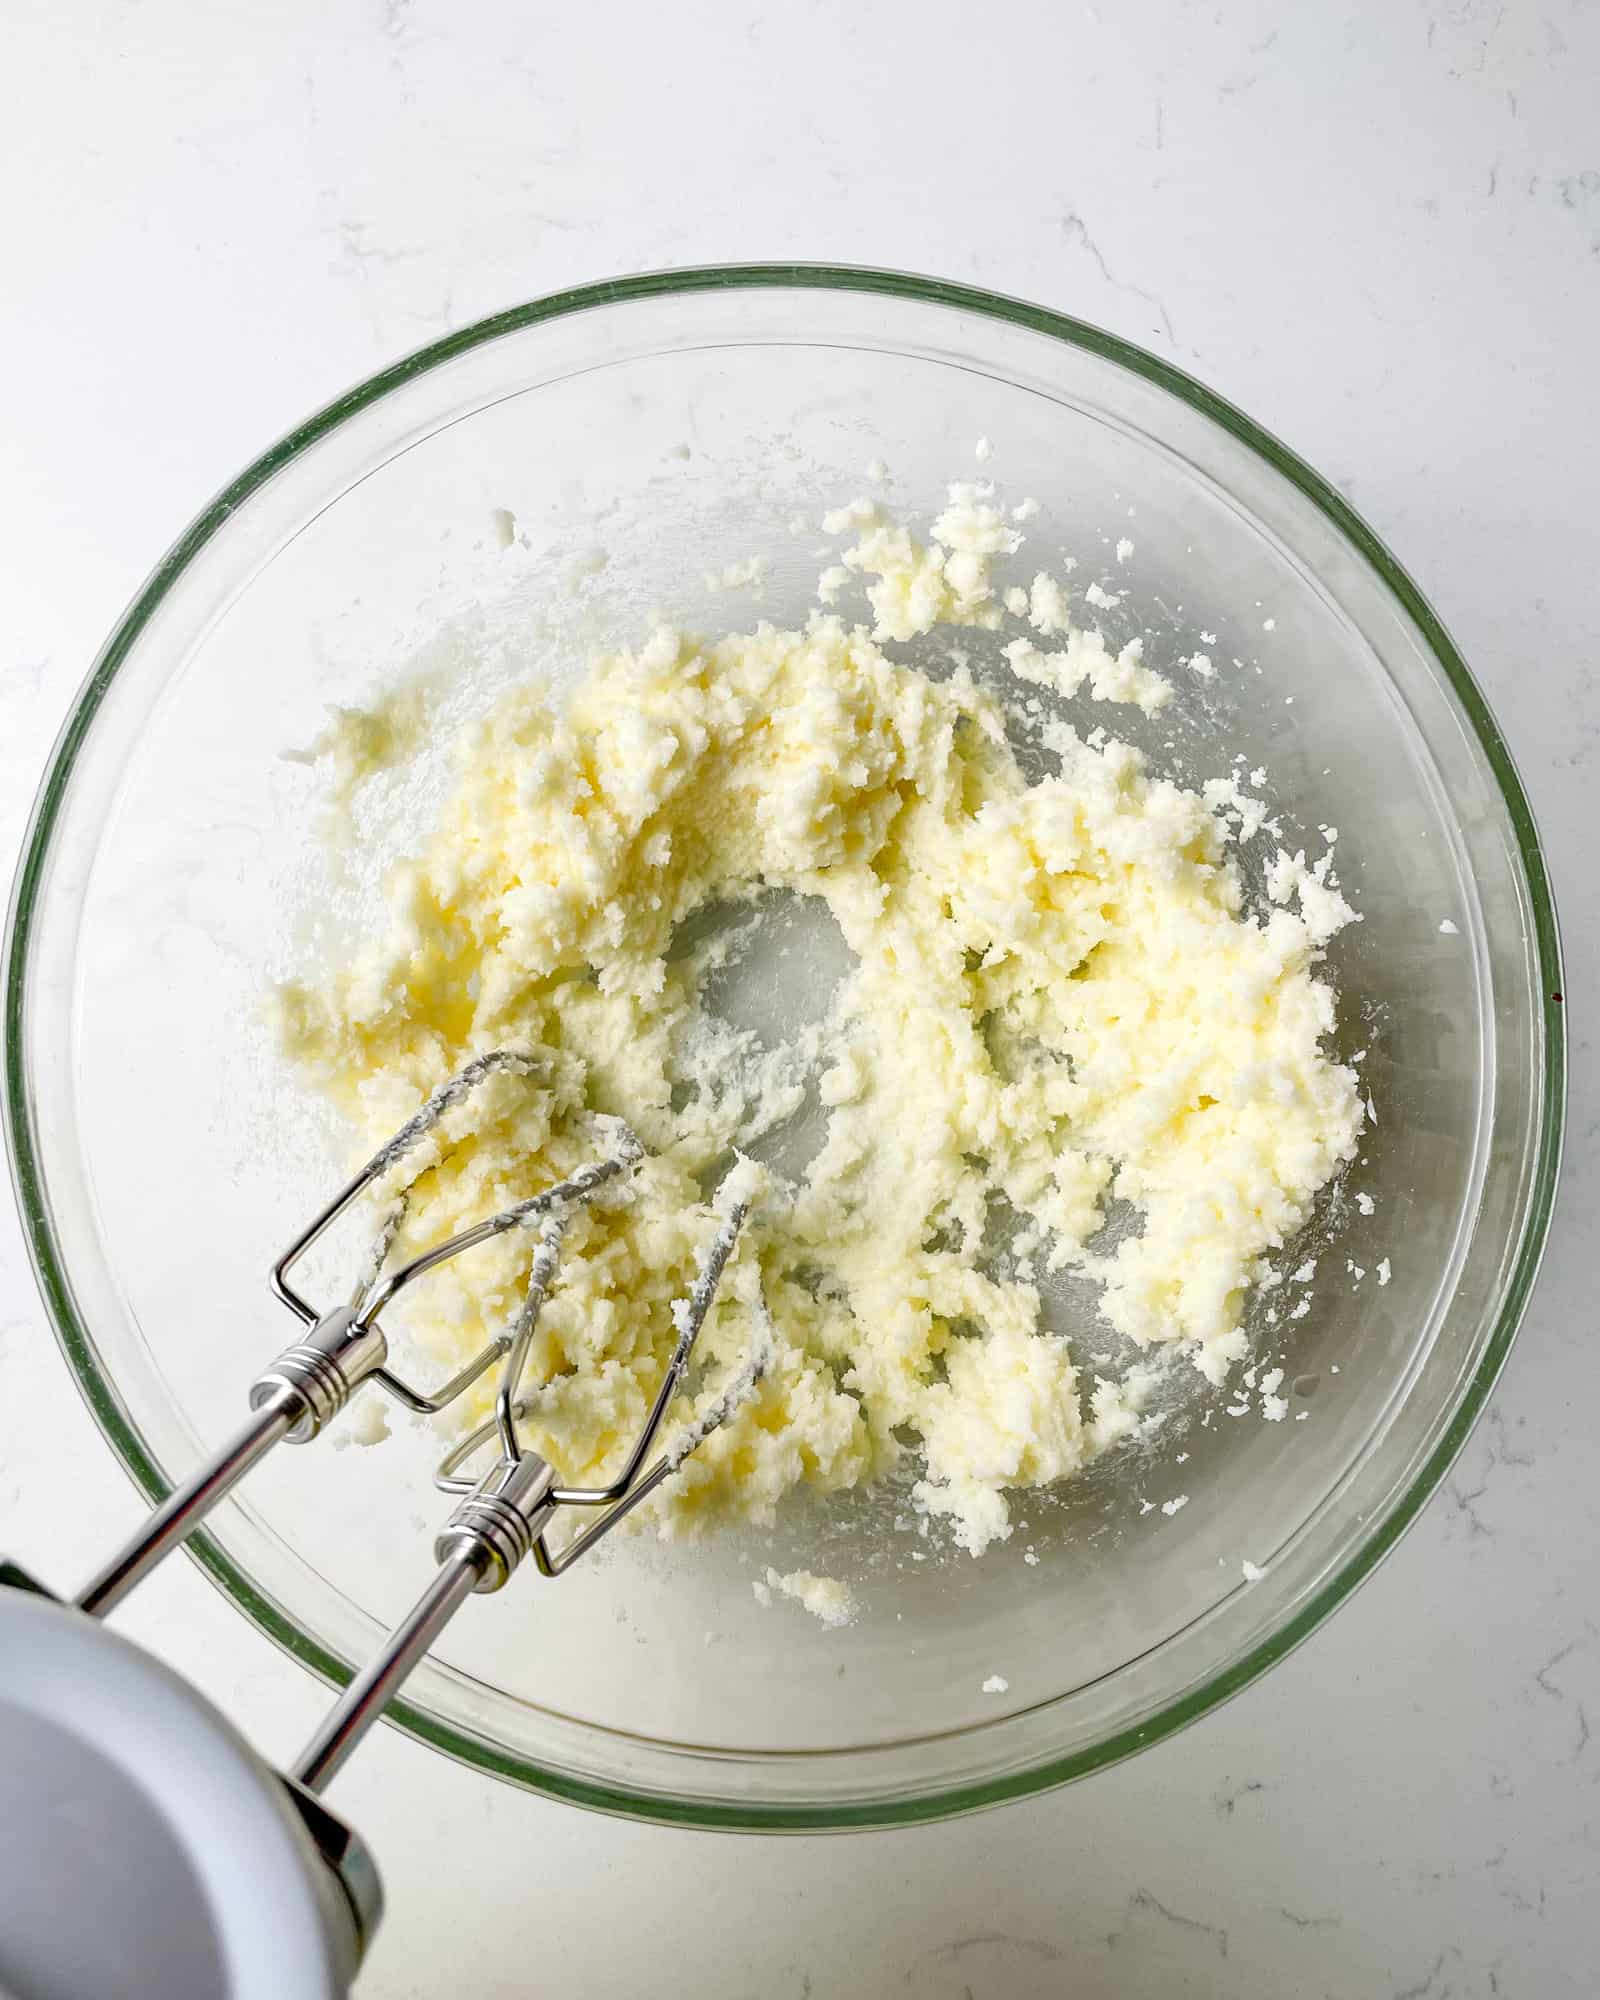 butter and sugar in a mixing bowl